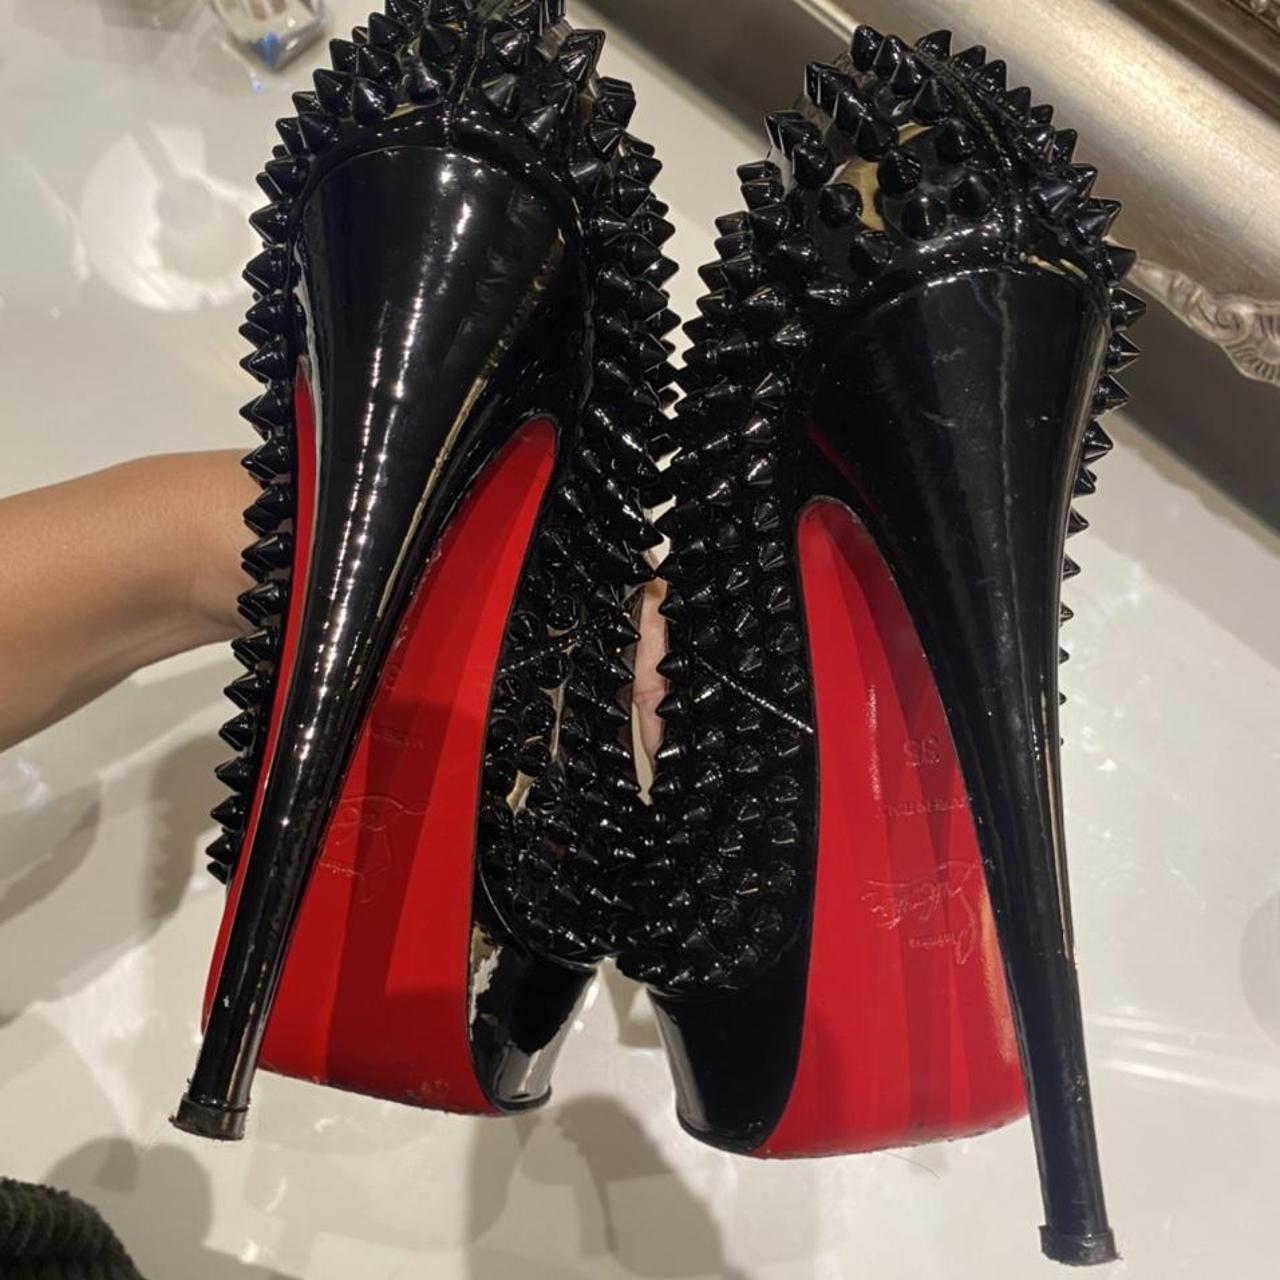 black spike shoes with red bottoms